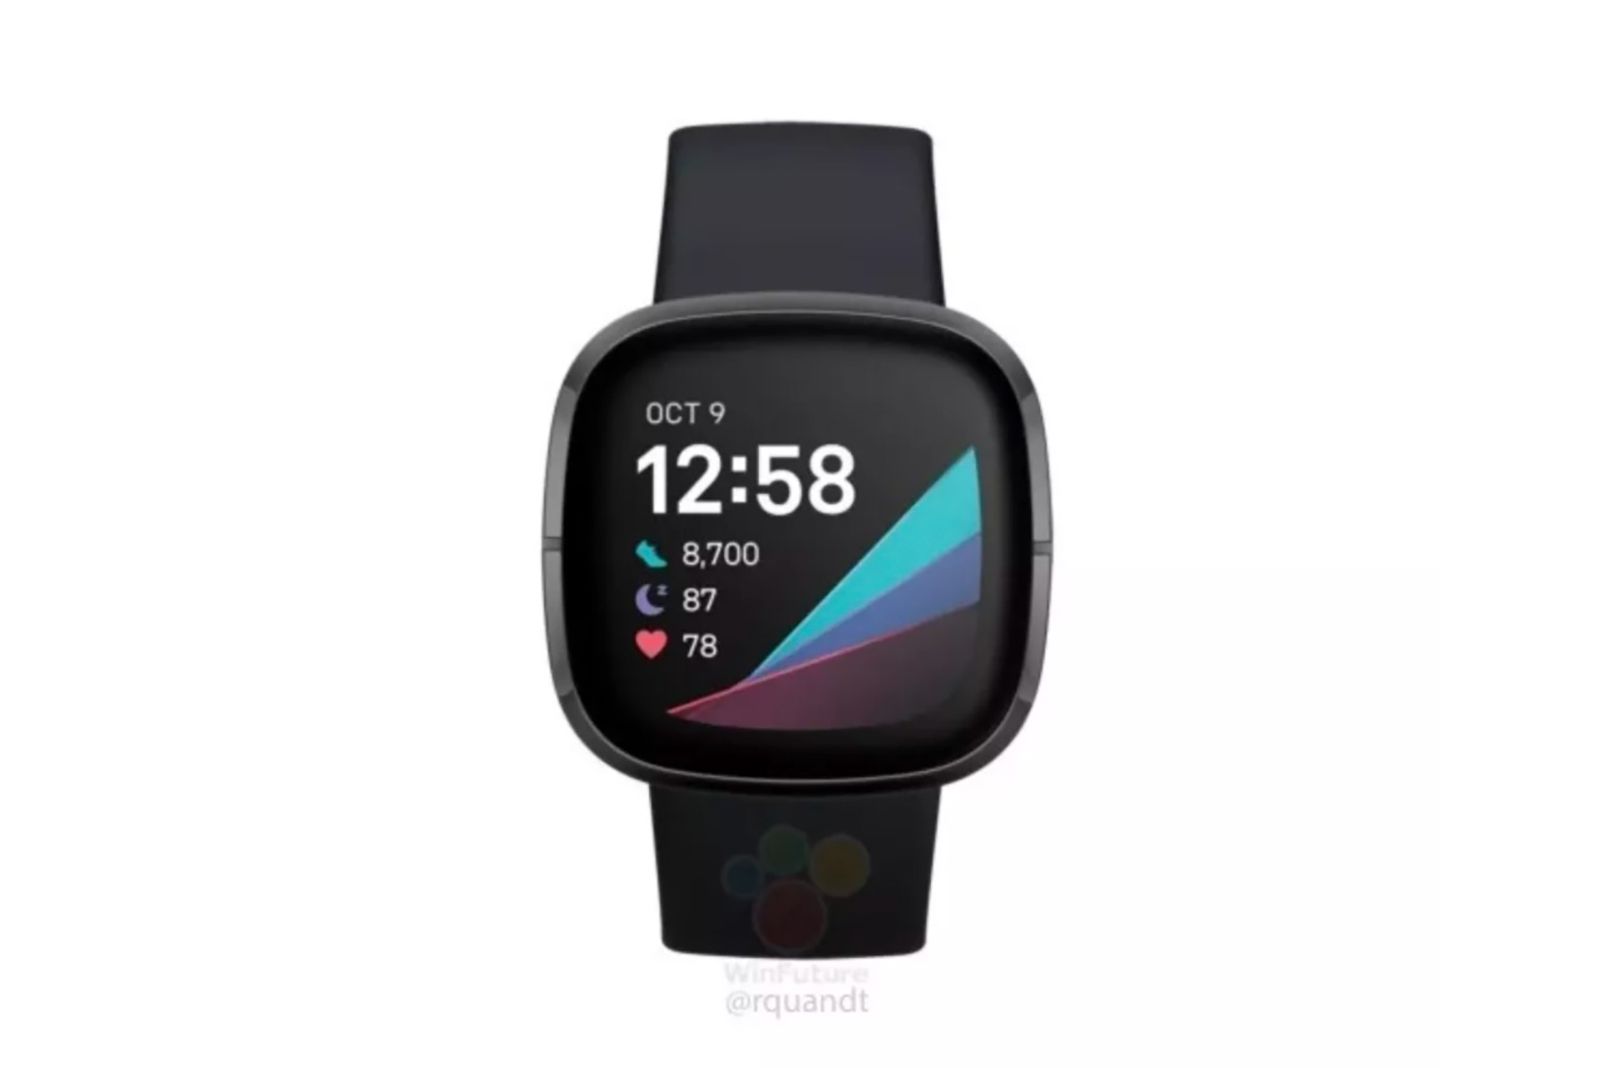 Fitbit Versa 3 and Fitbit Sense revealed in leaked images